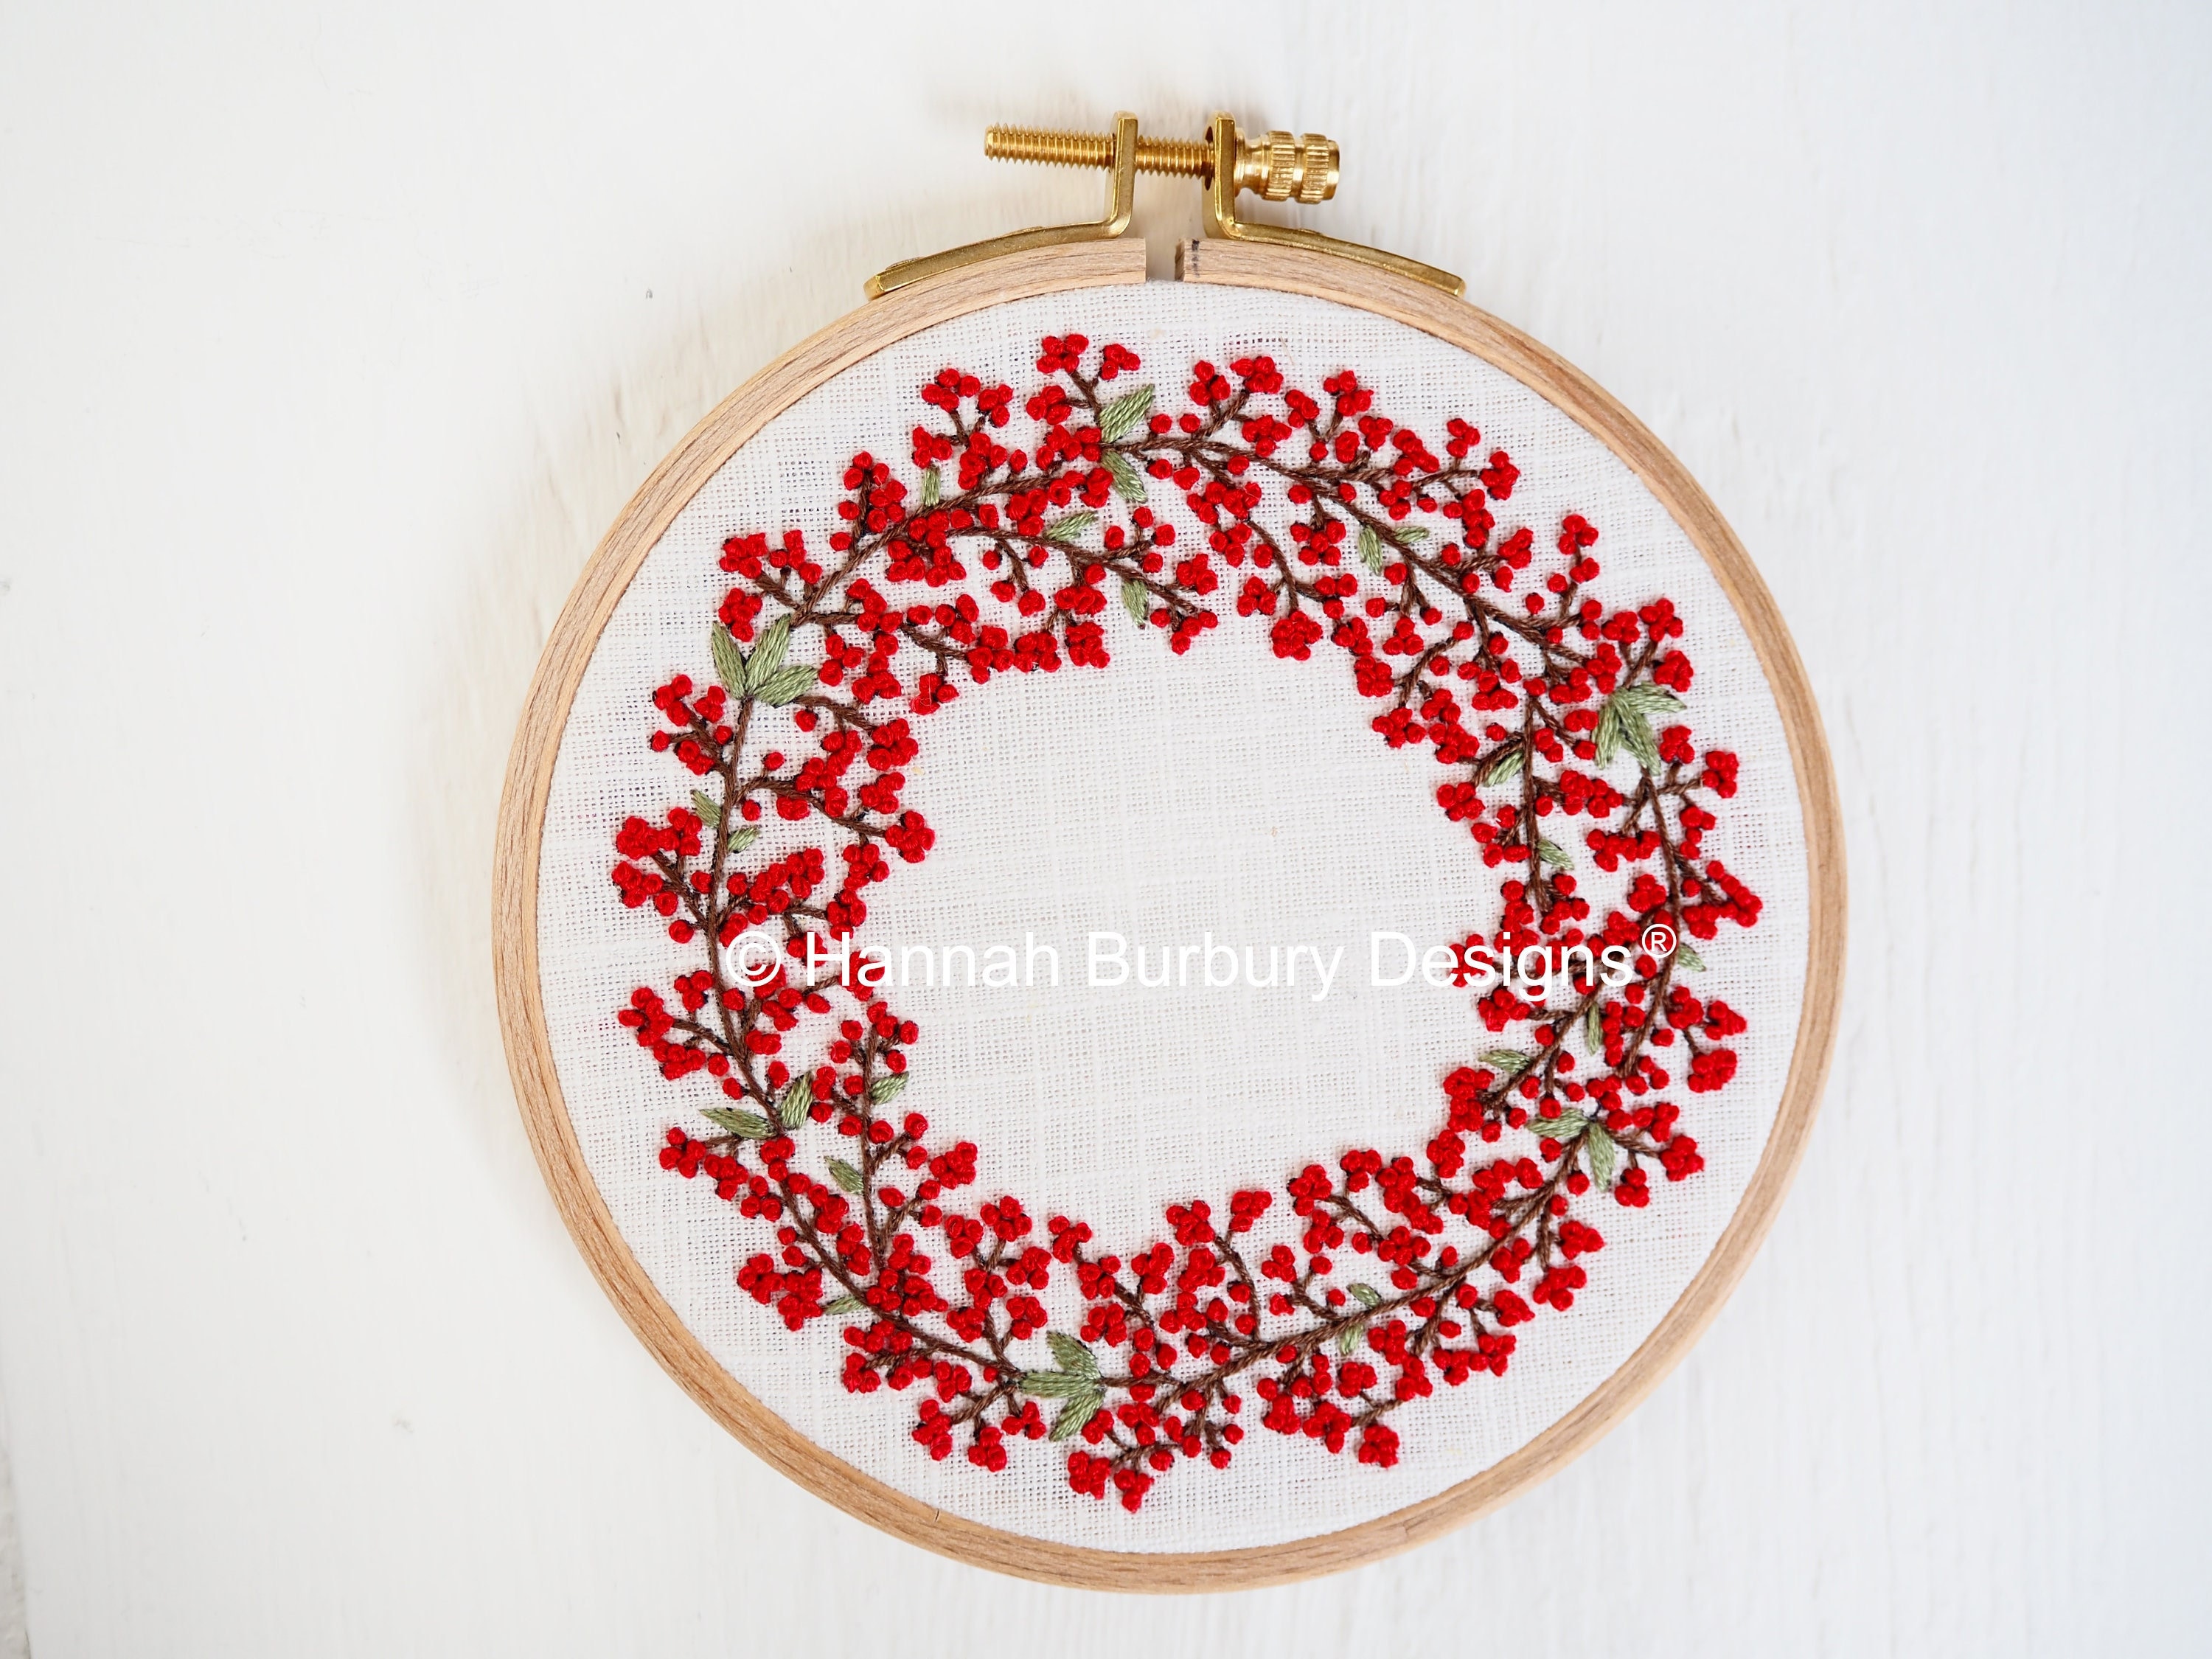 How To Cross Stitch Guide For Beginners - Hannah Hand Makes